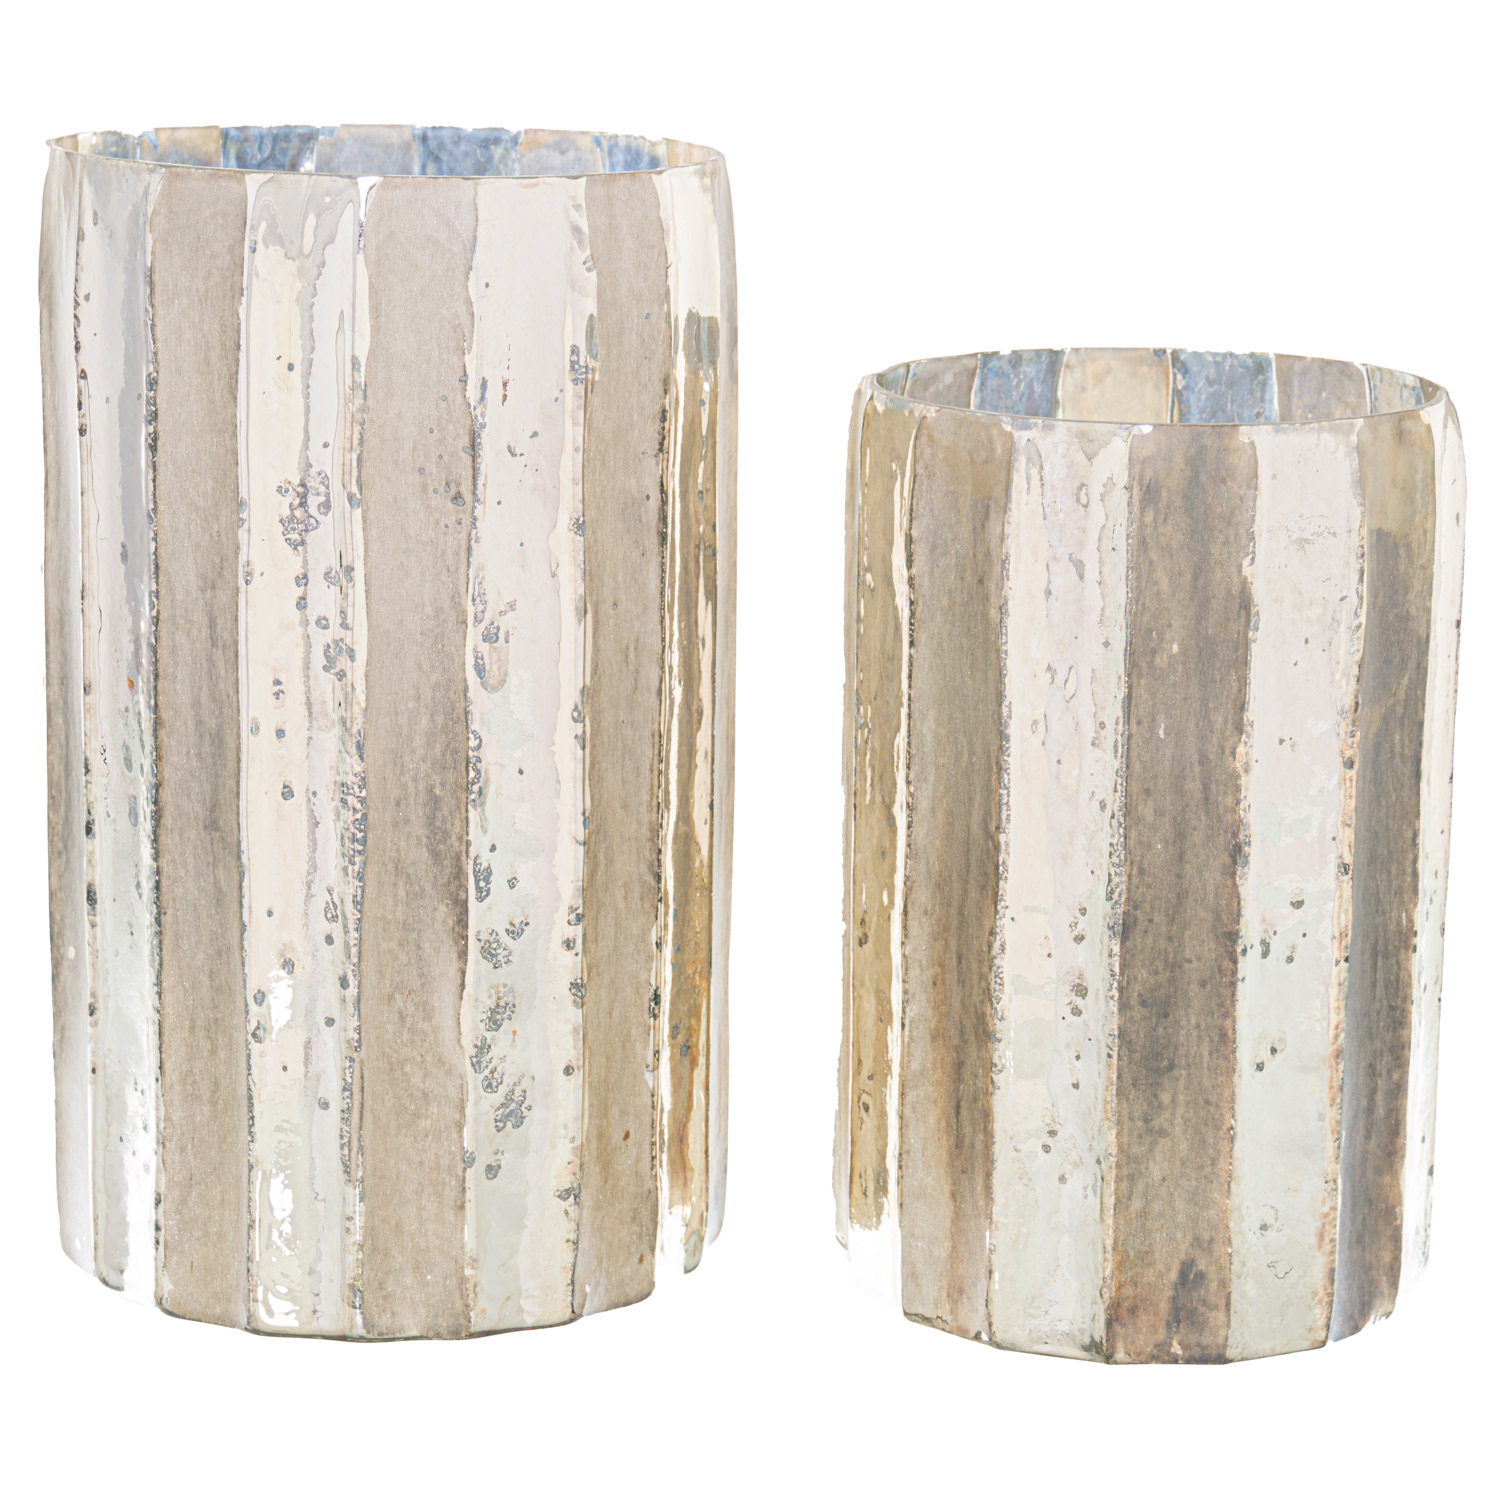 Silver And Grey Striped Candle Holder - Image 2